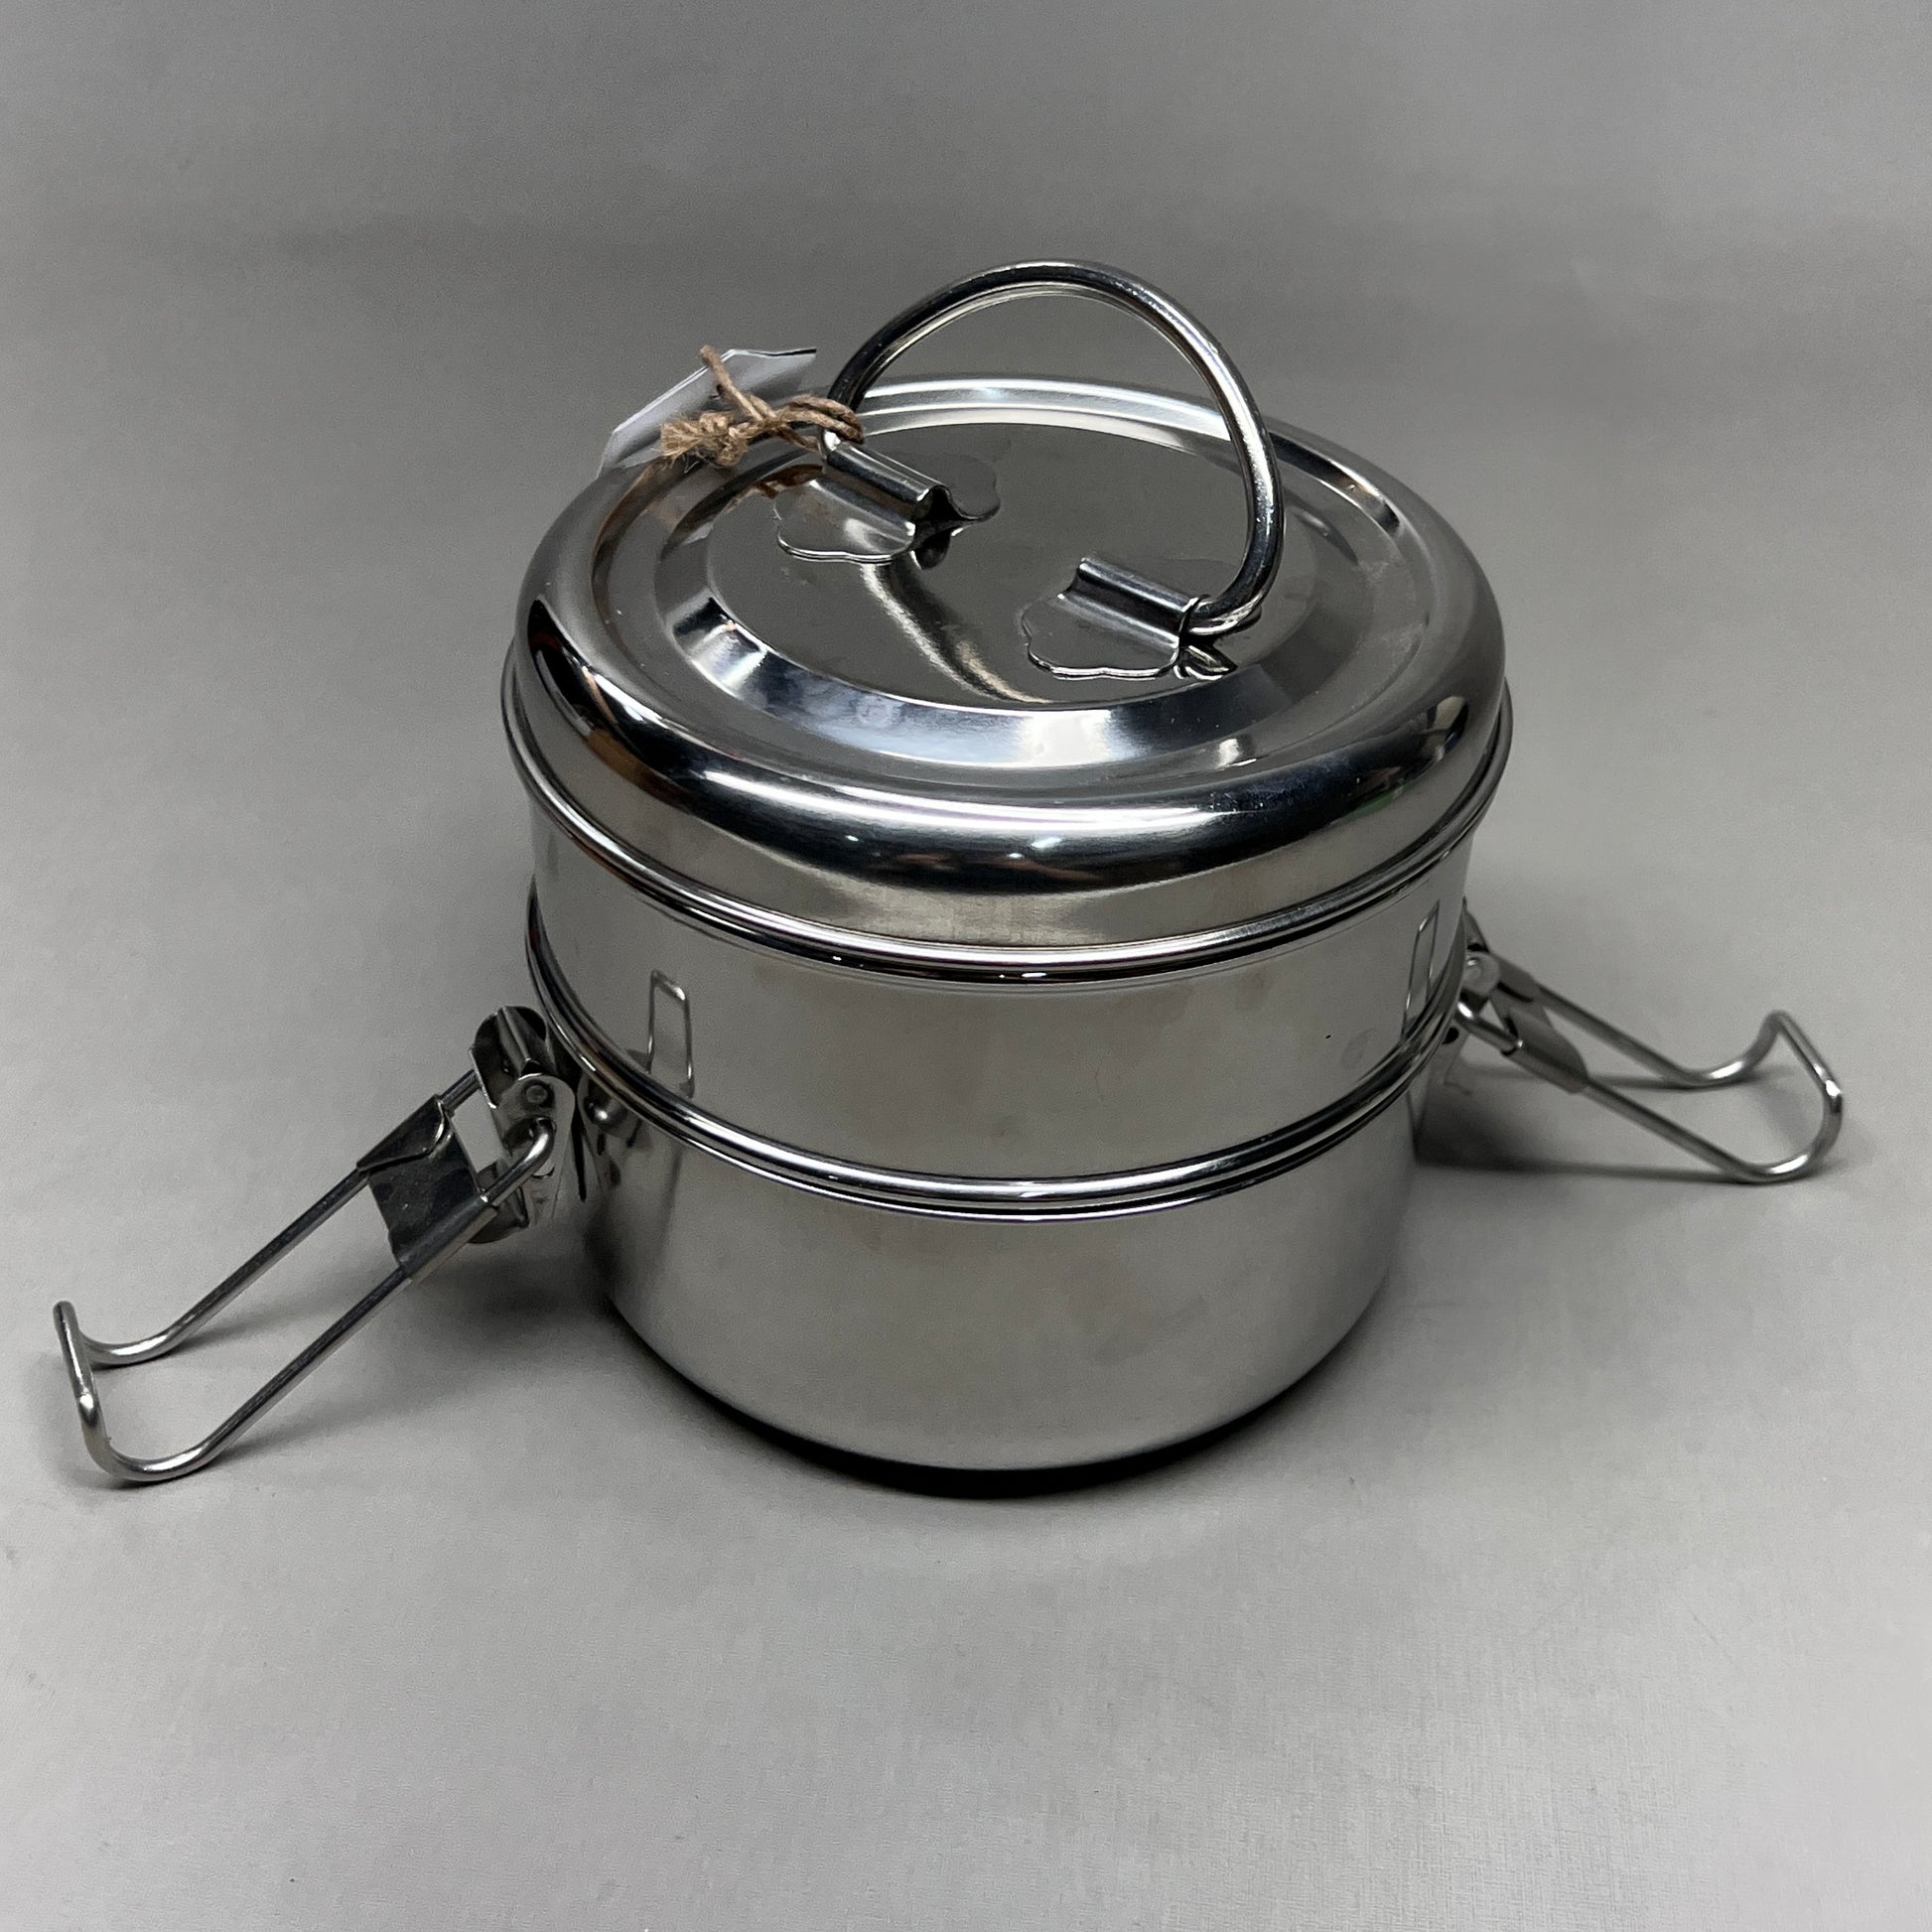 2-Tier Tiffin Lunch Box, Stainless Steel